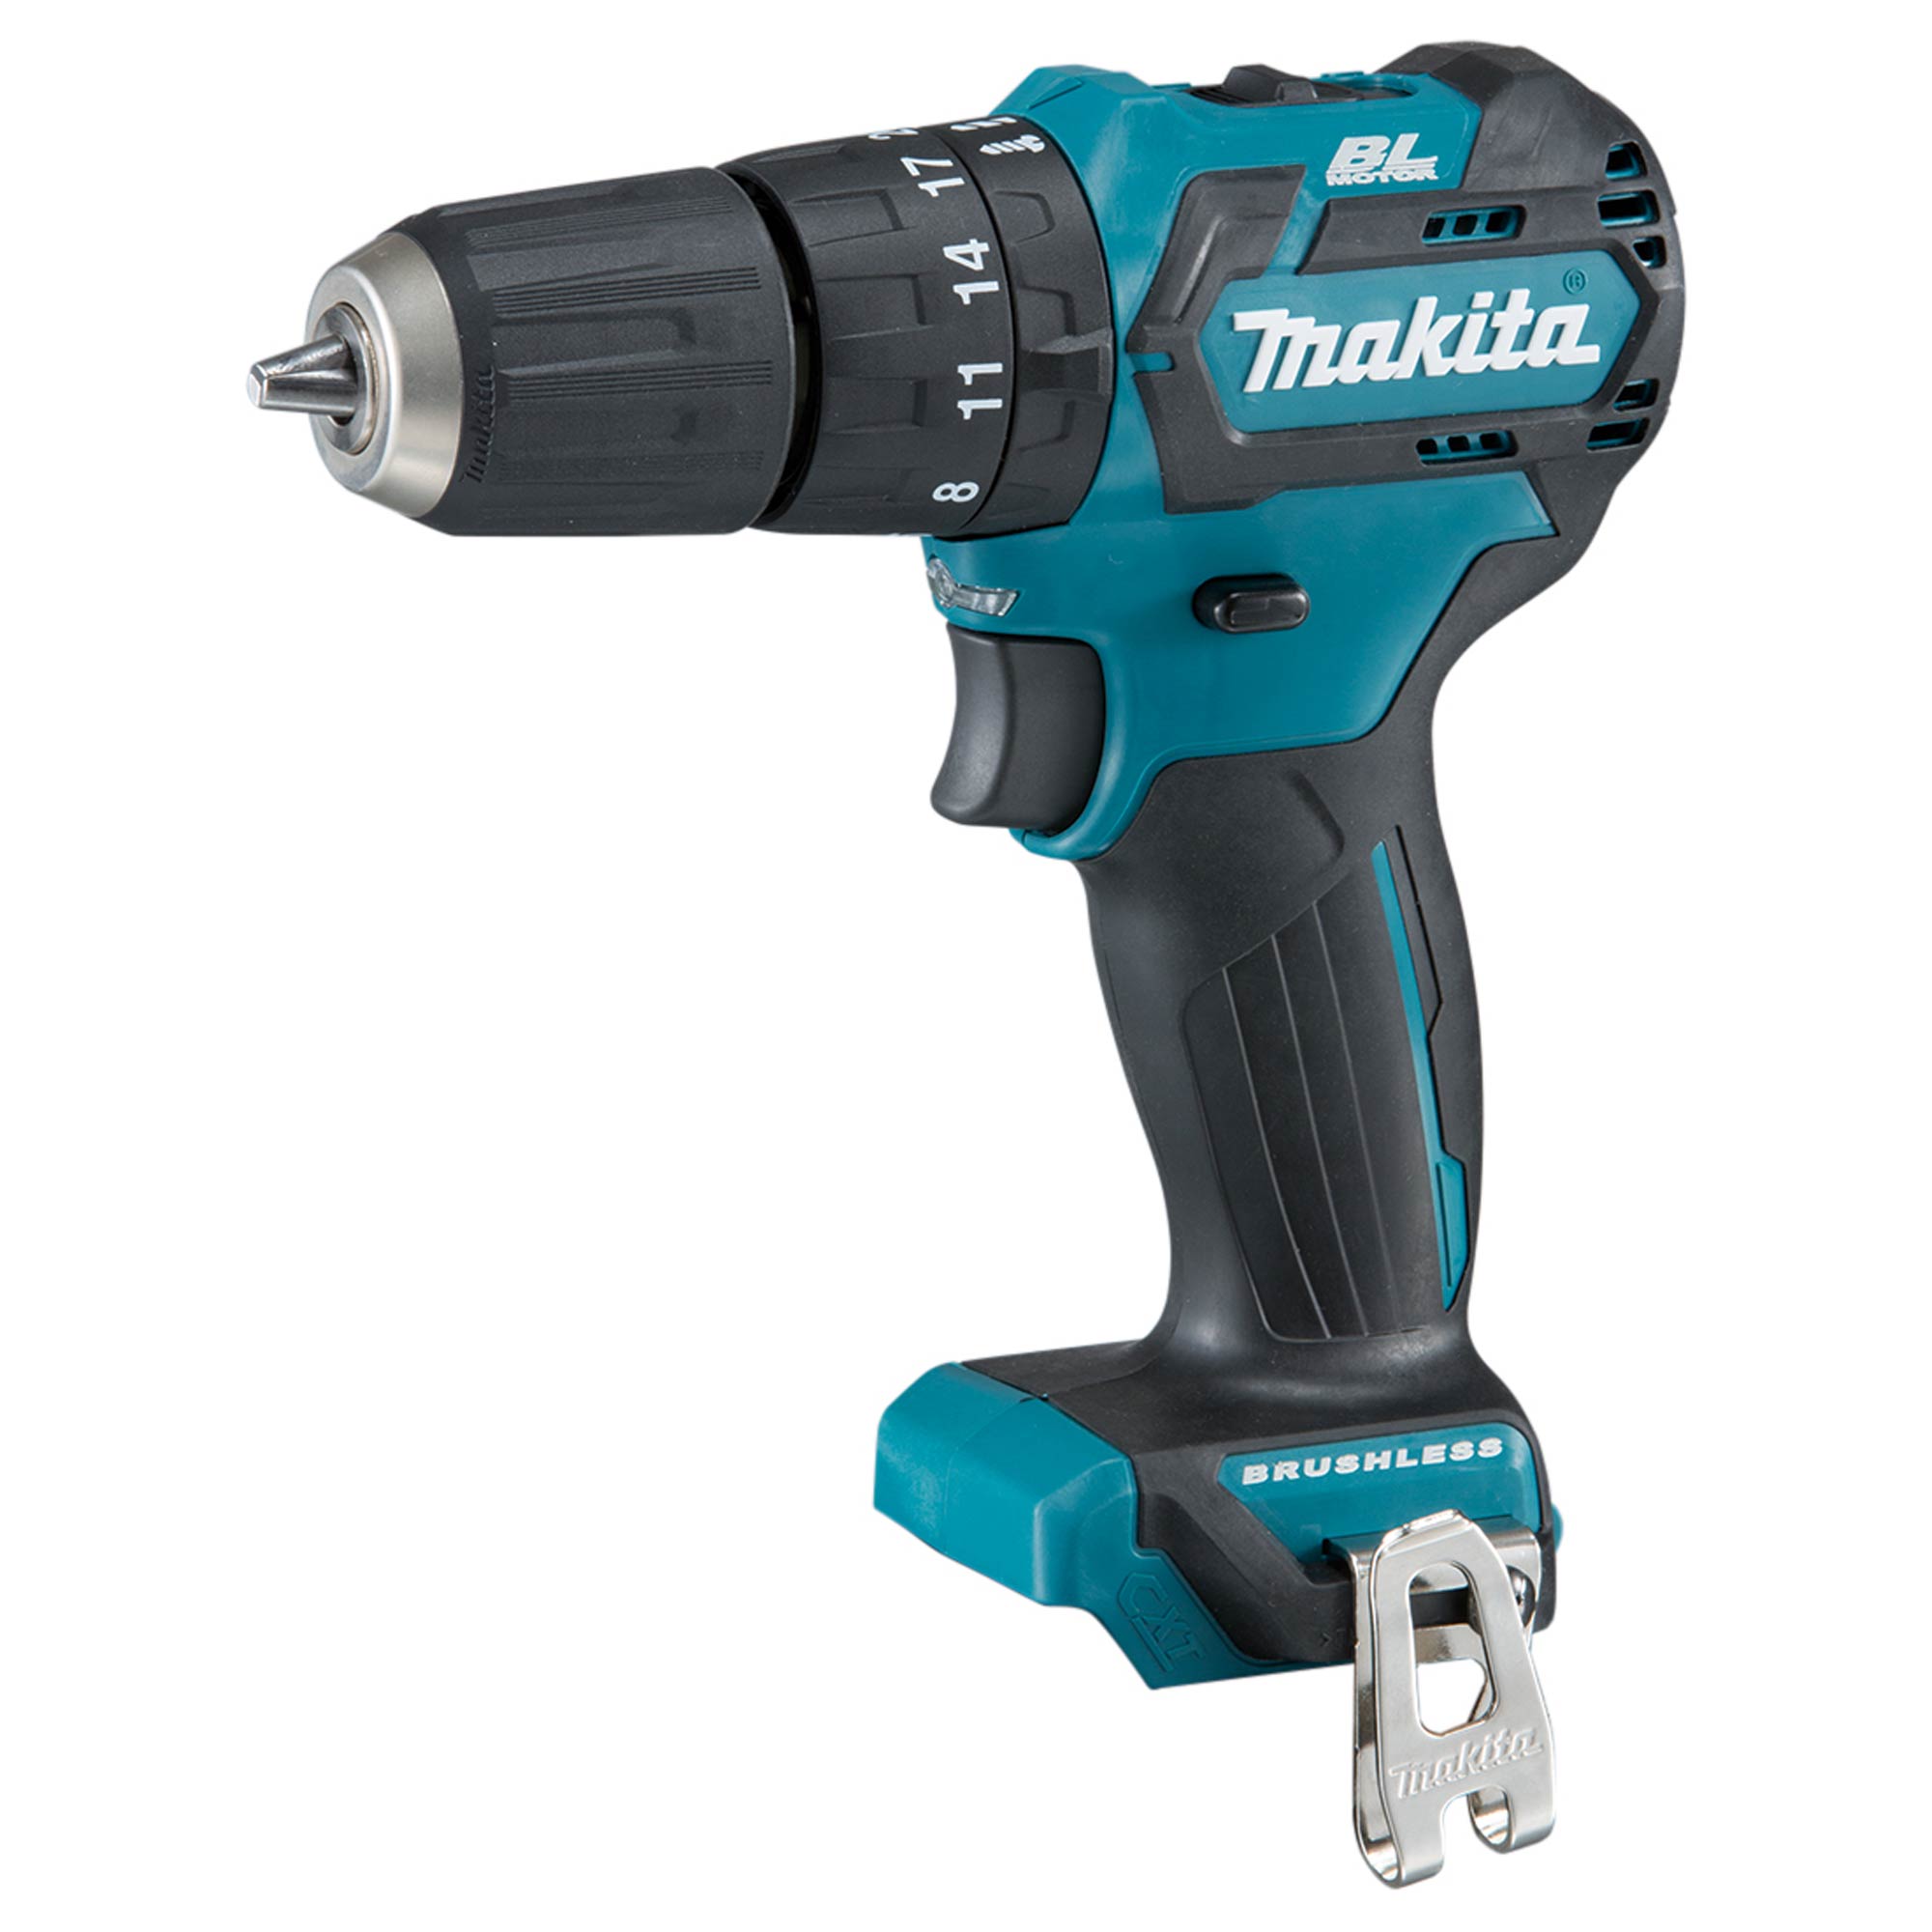 3/8" Cordless Hammer Drill / Driver with Brushless Motor